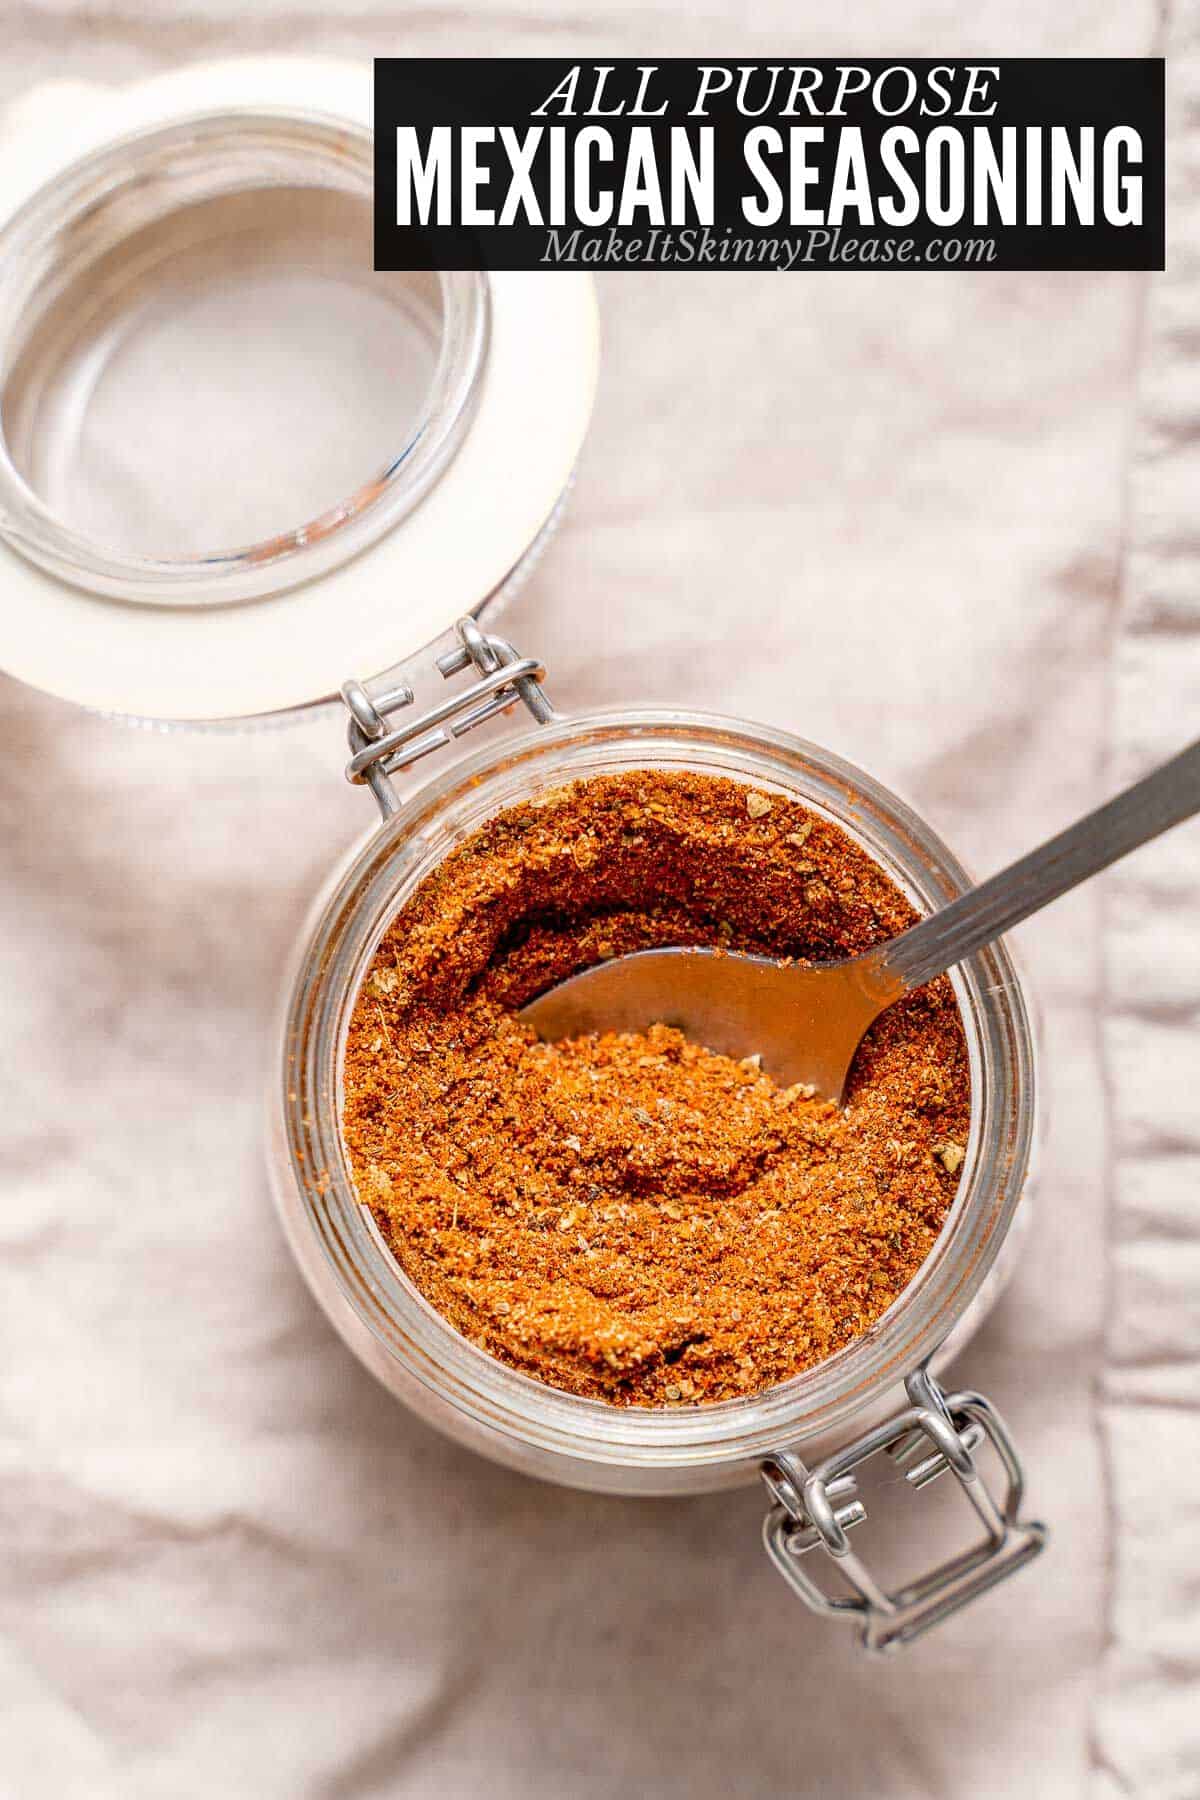 all purpose mexican seasoning in a glass jar with spoon.